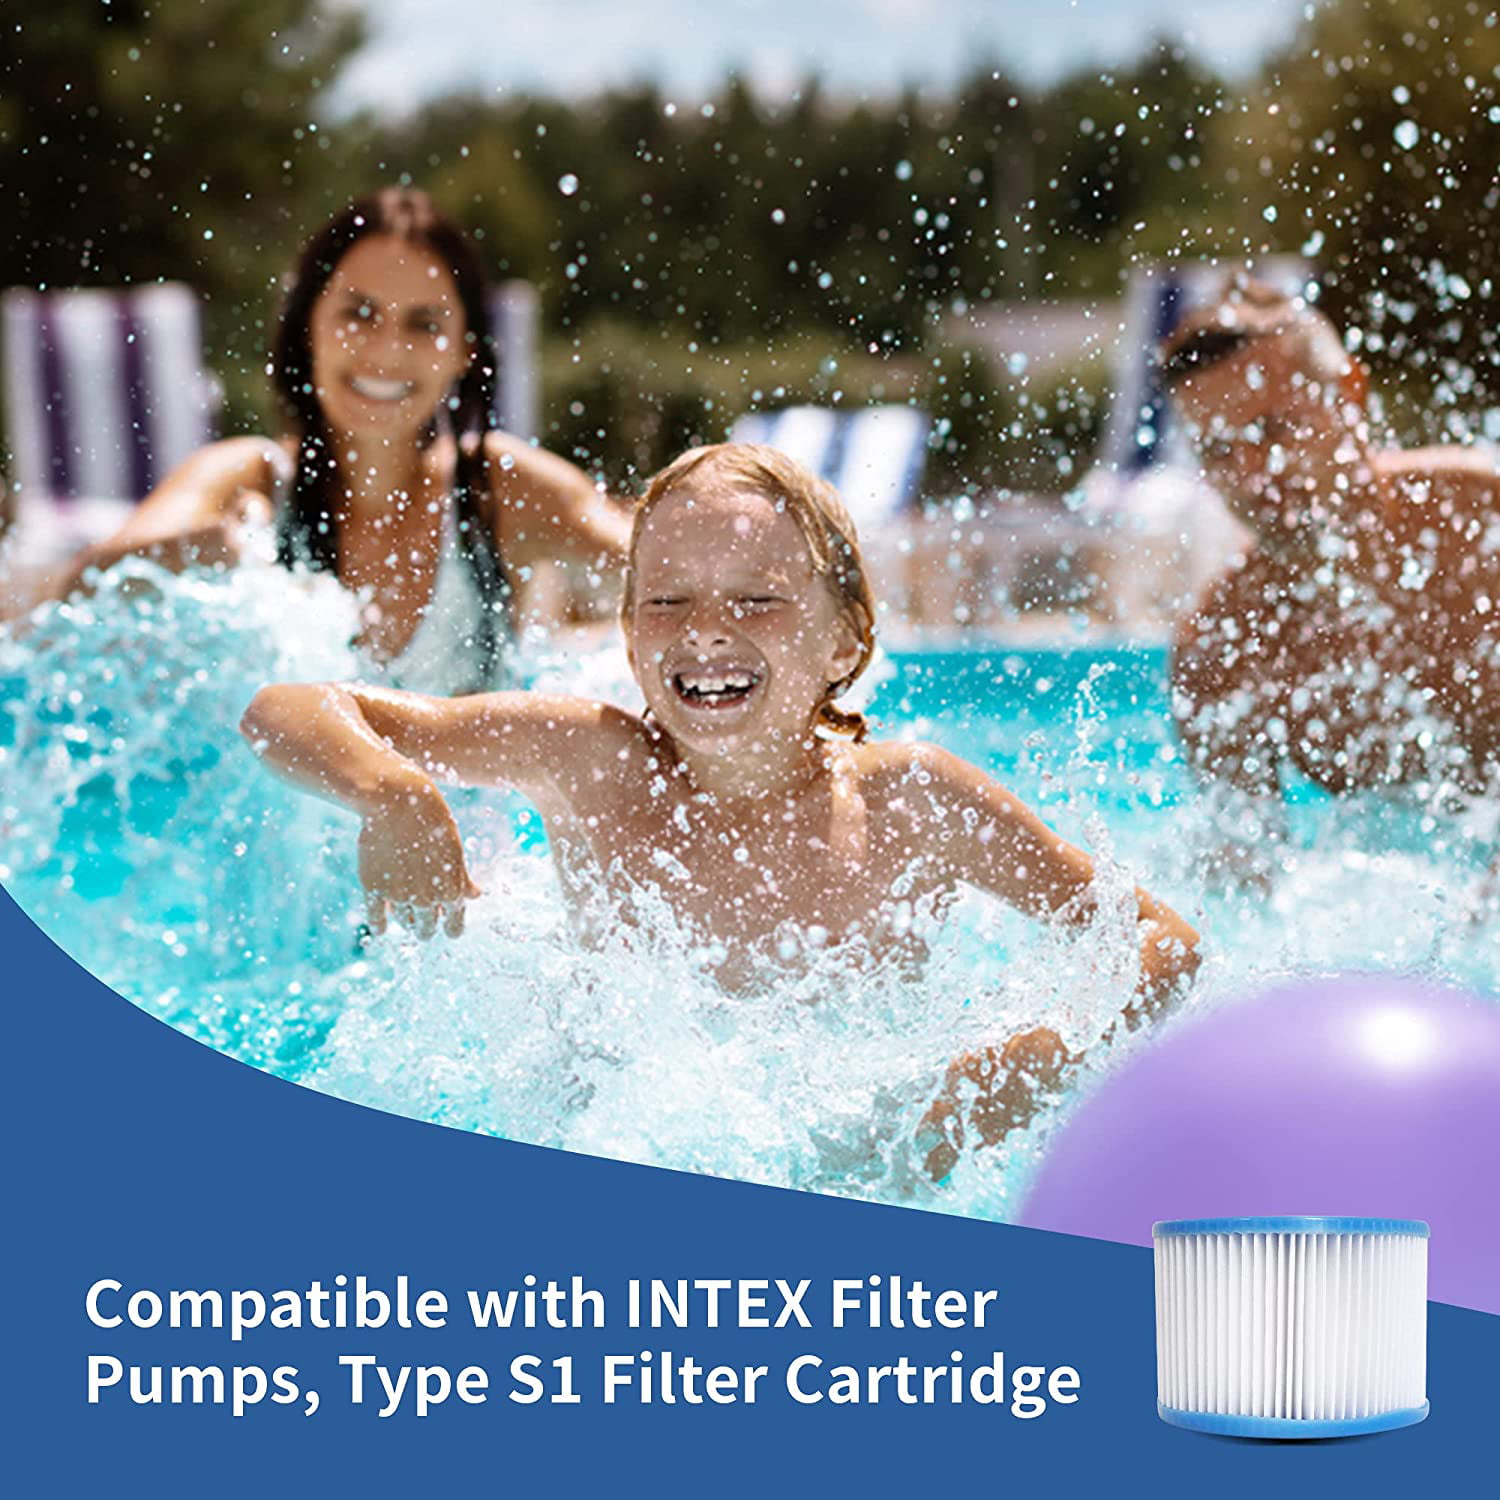 Volca Spares Type S1 Filter Cartridge for Intex PureSpa Hot Tub Models 12 Pack 29001E 